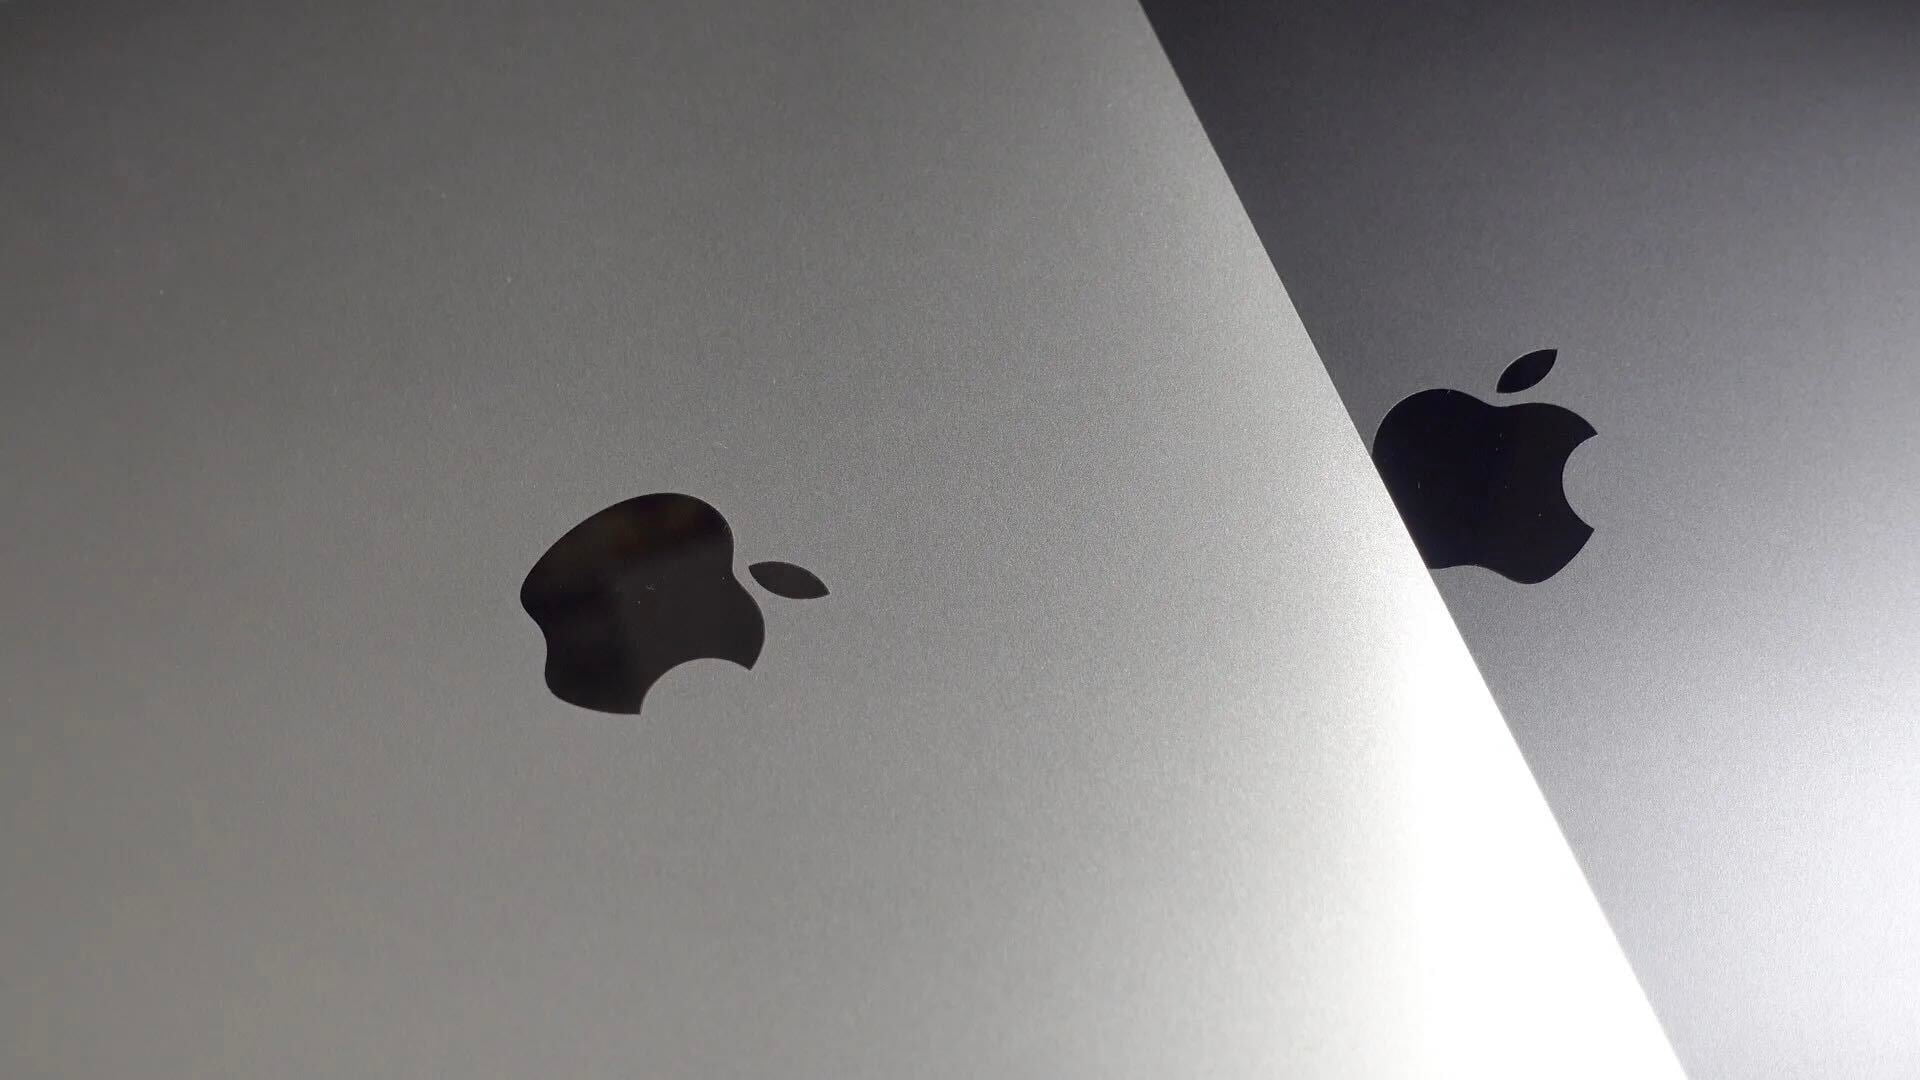 Apple exports iPhone 6 Plus and iPad 4 to vintage list, limiting service  options - 9to5Mac